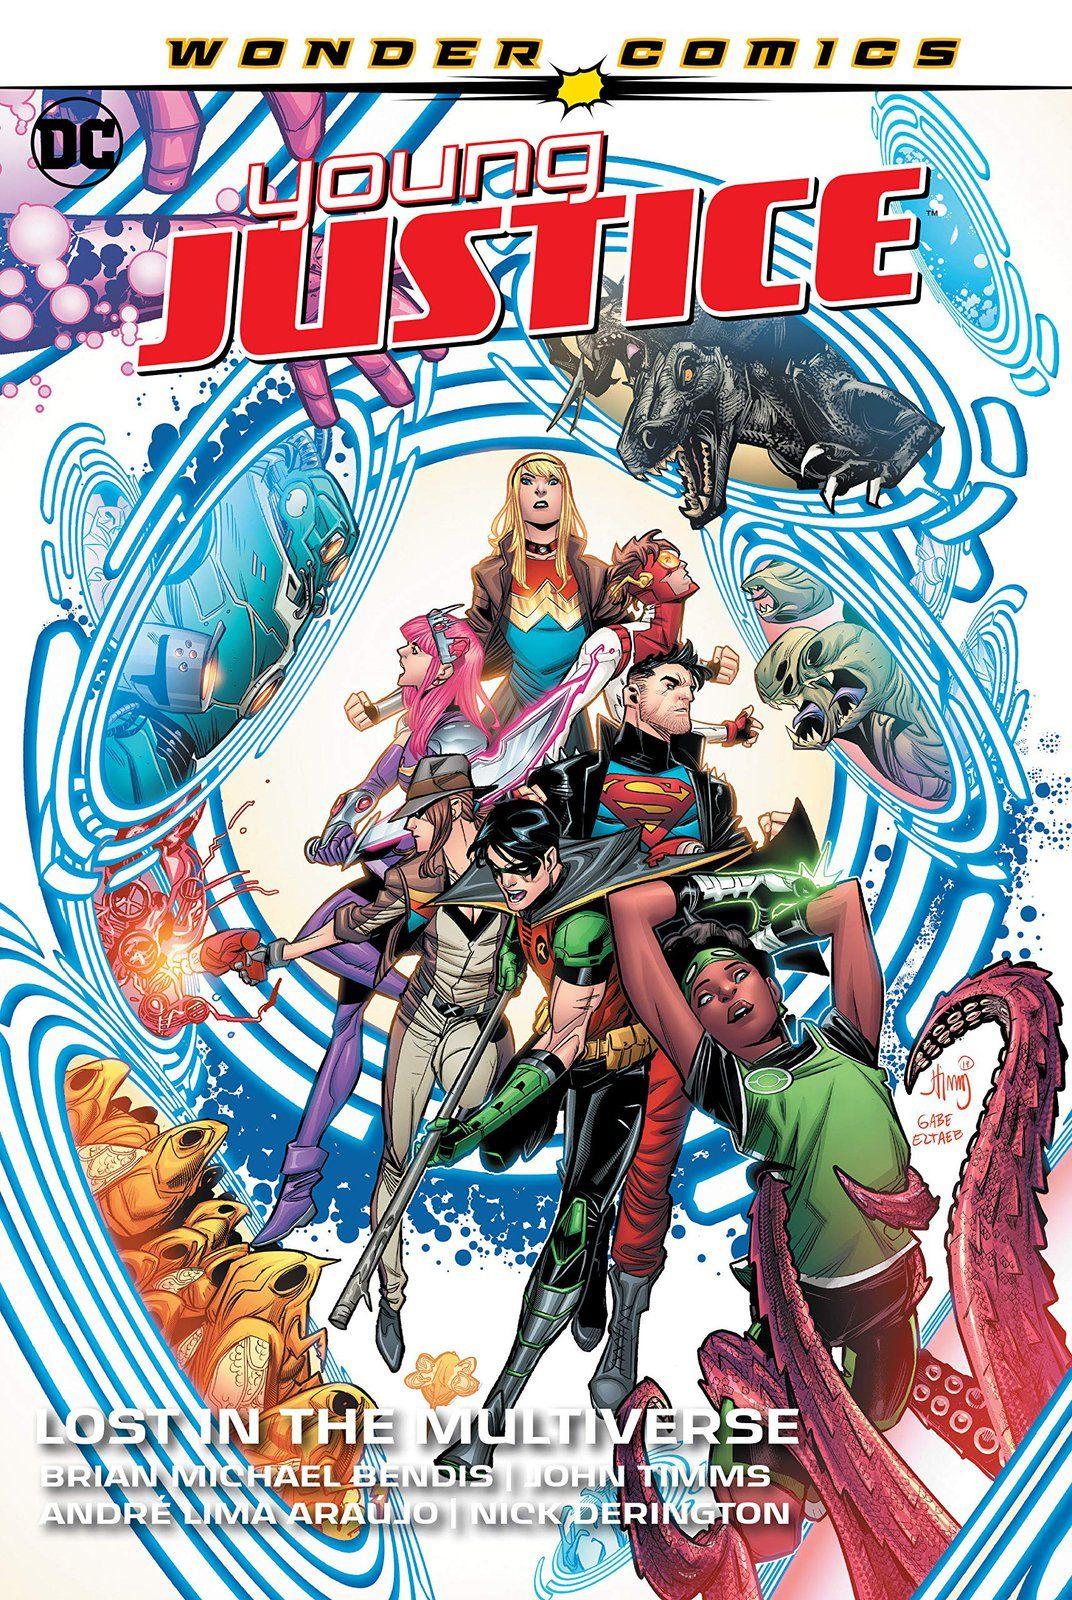 YOUNG JUSTICE VOL 02 LOST IN THE MULTIVERSE TP (SHIPS 12-29-20) - PCKComics.com